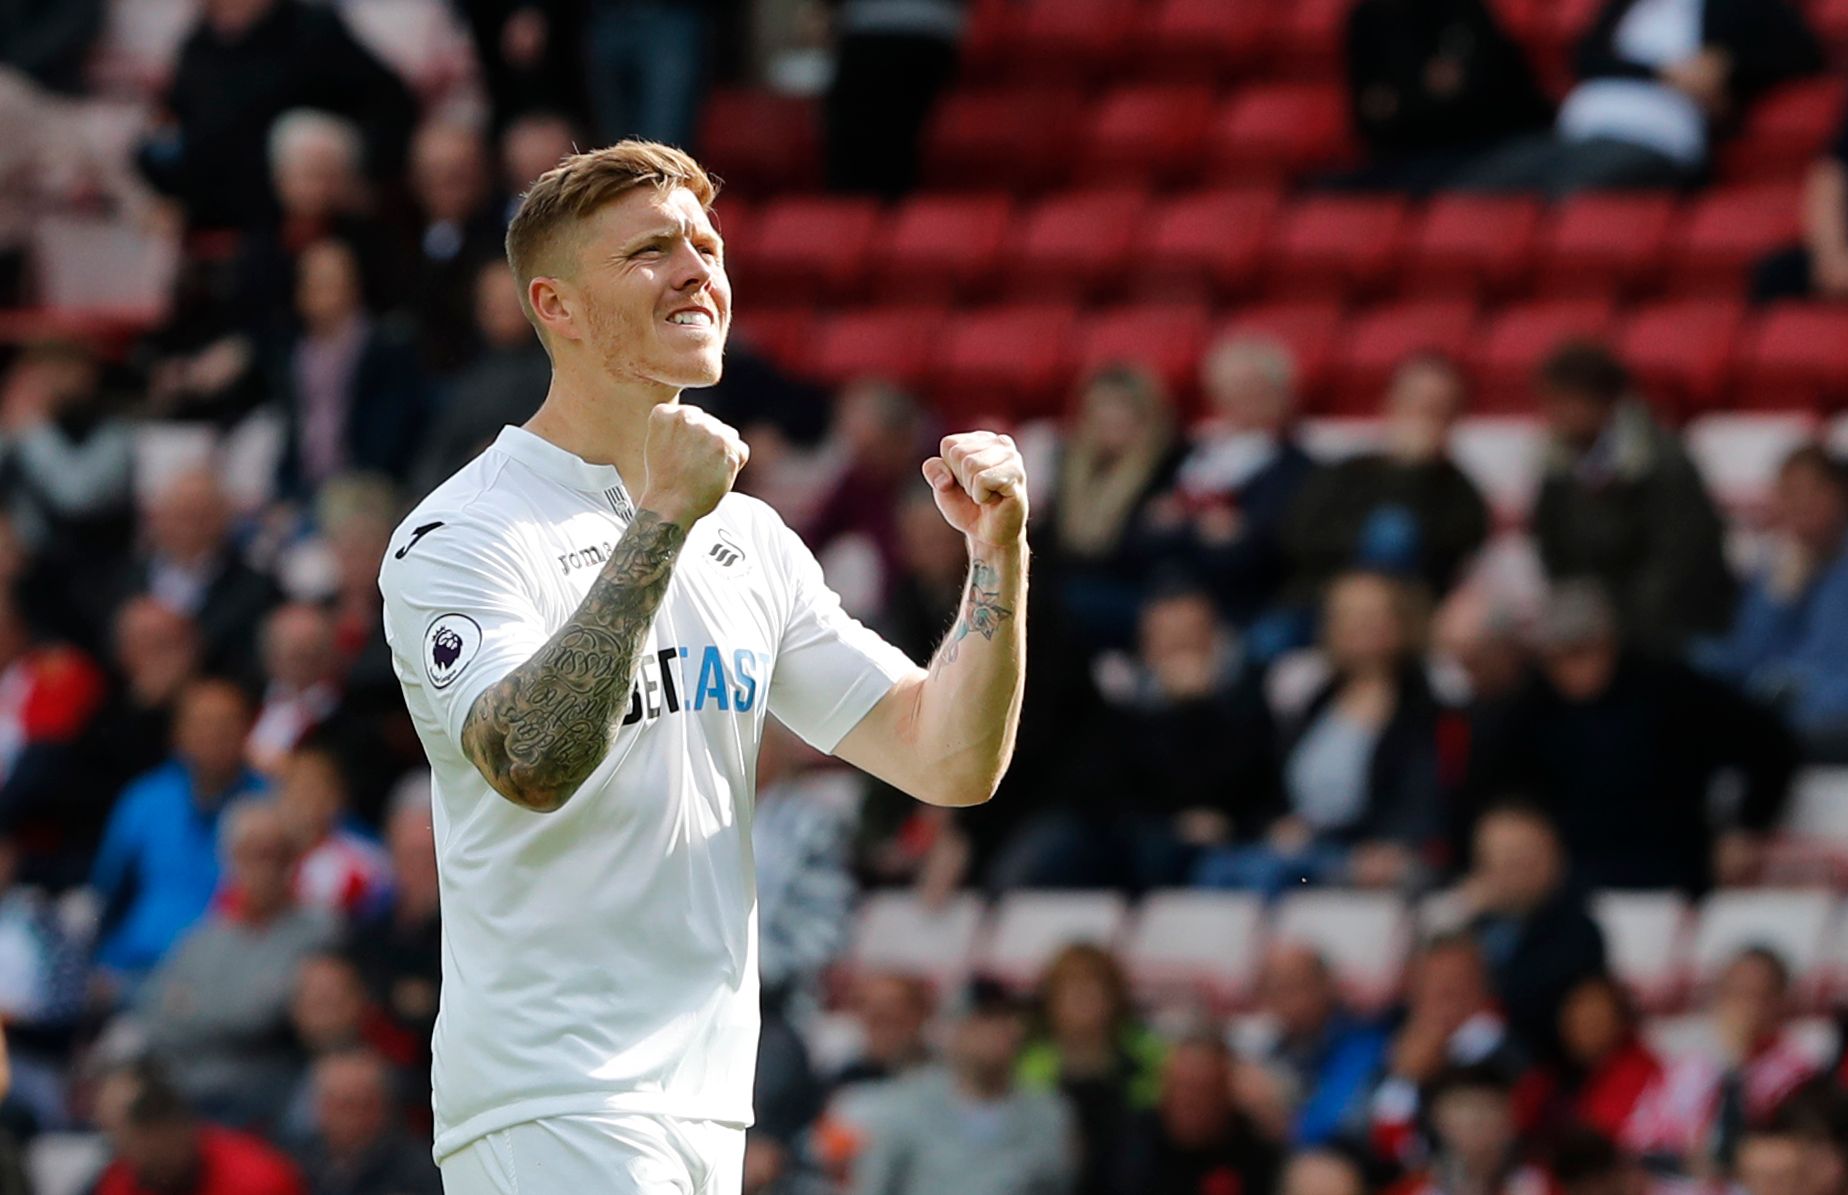 Britain Football Soccer - Sunderland v Swansea City - Premier League - Stadium of Light - 13/5/17 Swansea City's Alfie Mawson celebrates after the match  Reuters / Russell Cheyne Livepic EDITORIAL USE ONLY. No use with unauthorized audio, video, data, fixture lists, club/league logos or "live" services. Online in-match use limited to 45 images, no video emulation. No use in betting, games or single club/league/player publications.  Please contact your account representative for further details.